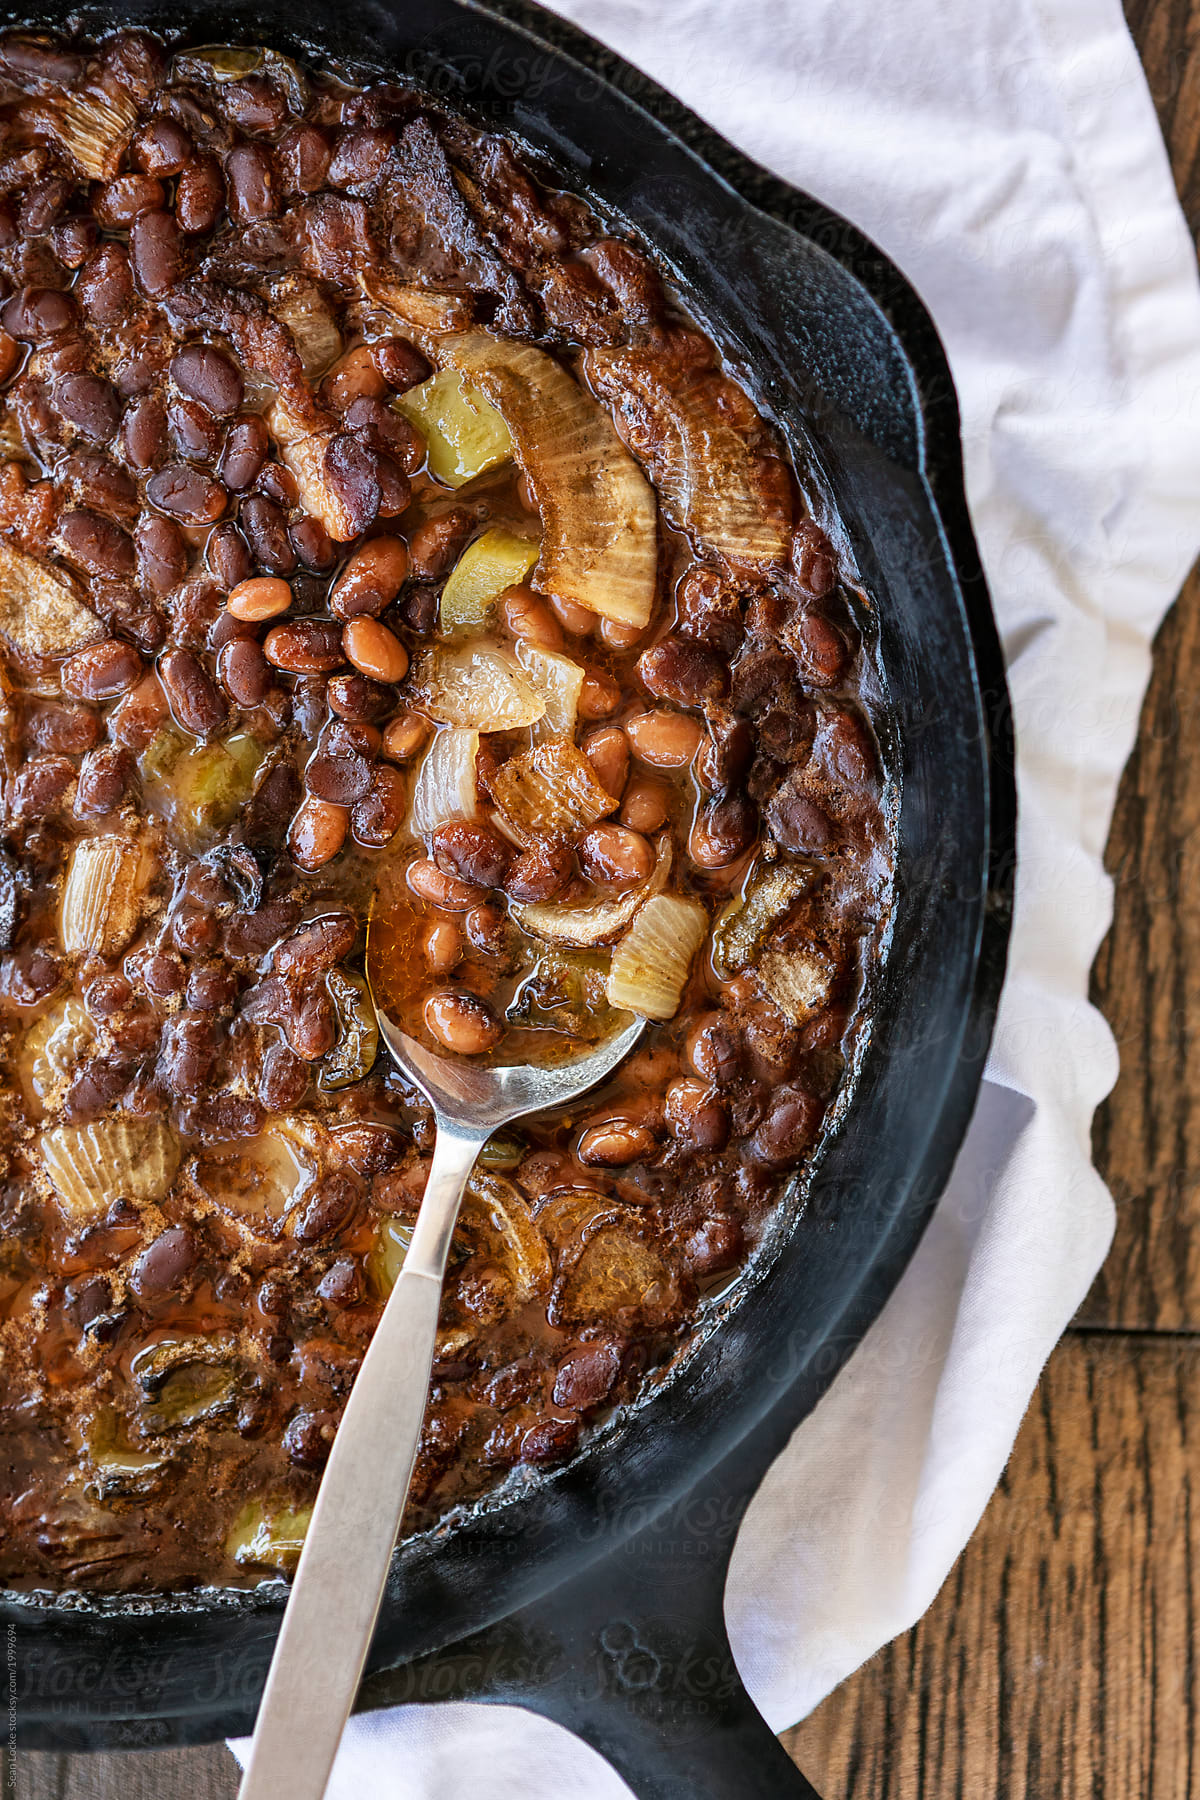 Smoked: Spoon Sits In Cast Iron Pan Of Baked Beans